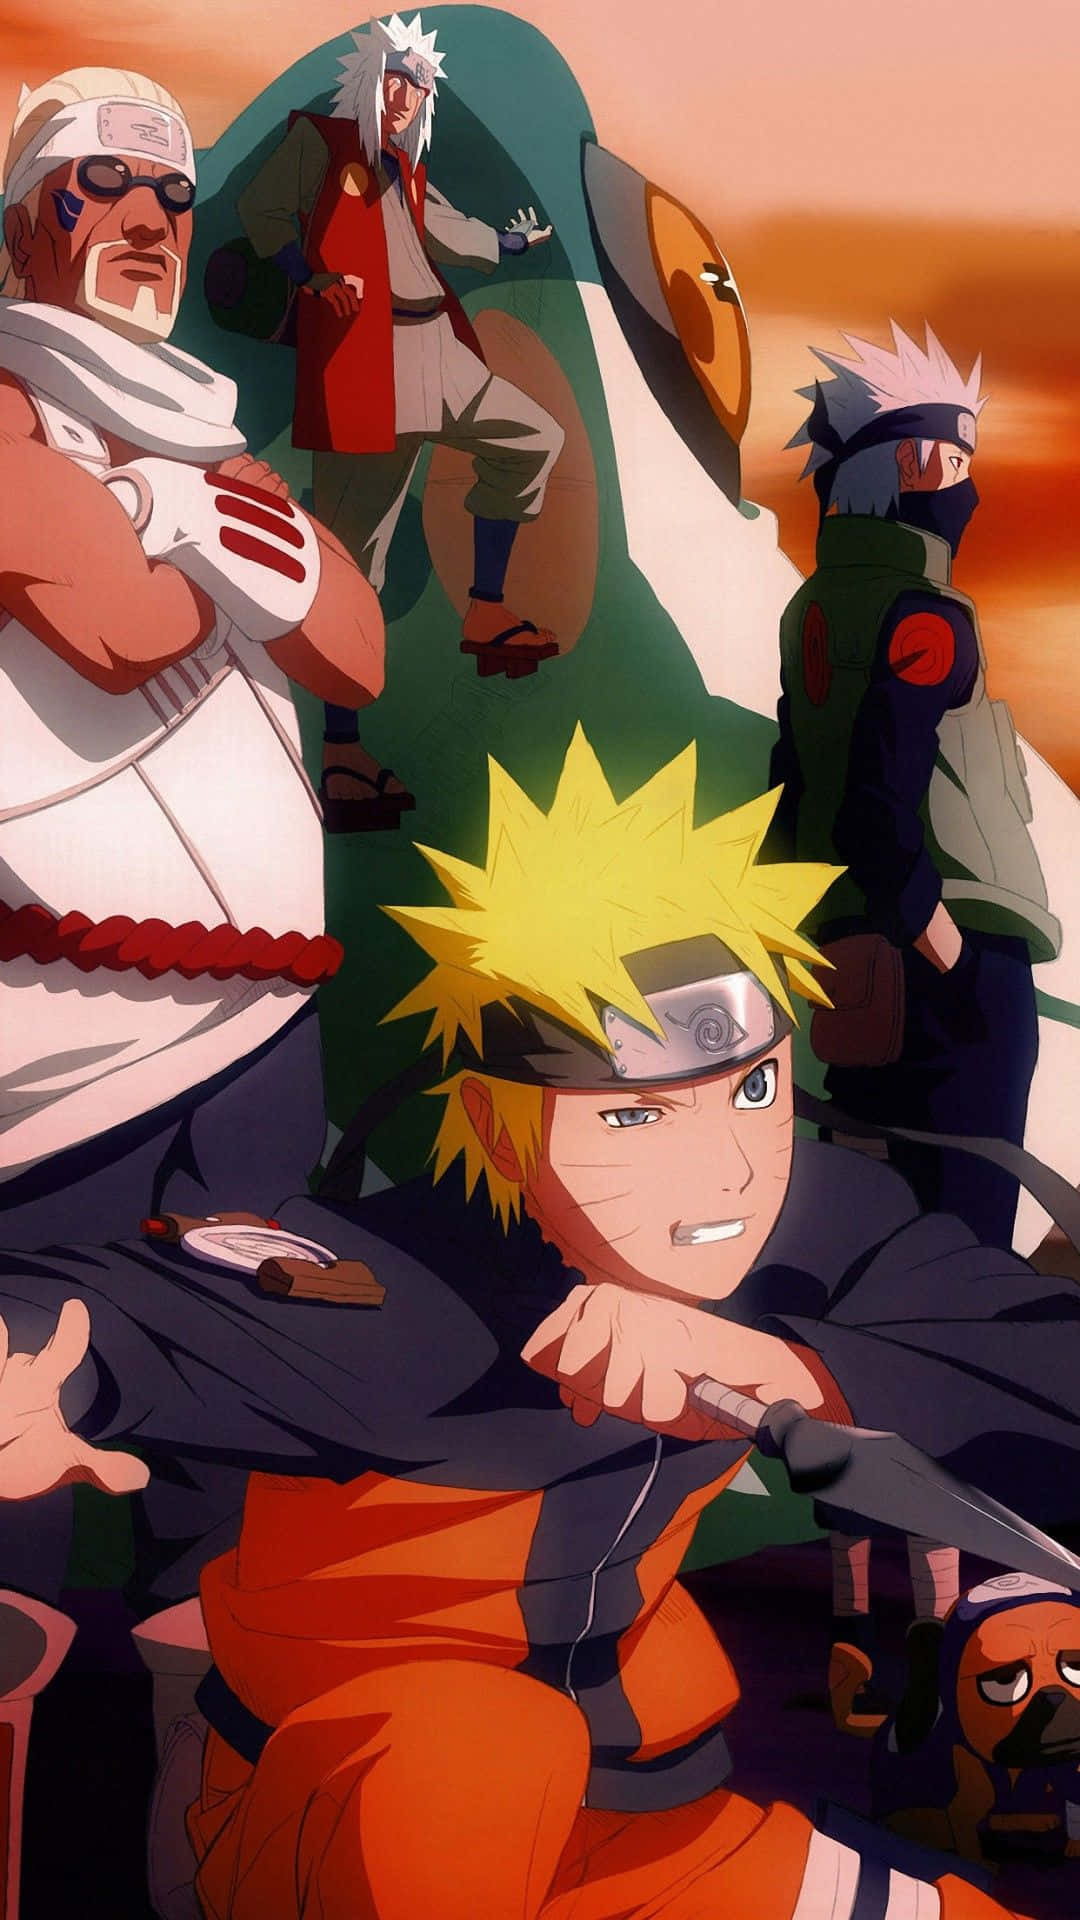 Unlock the naruto shippuden experience with the revolutionary iPhone Wallpaper